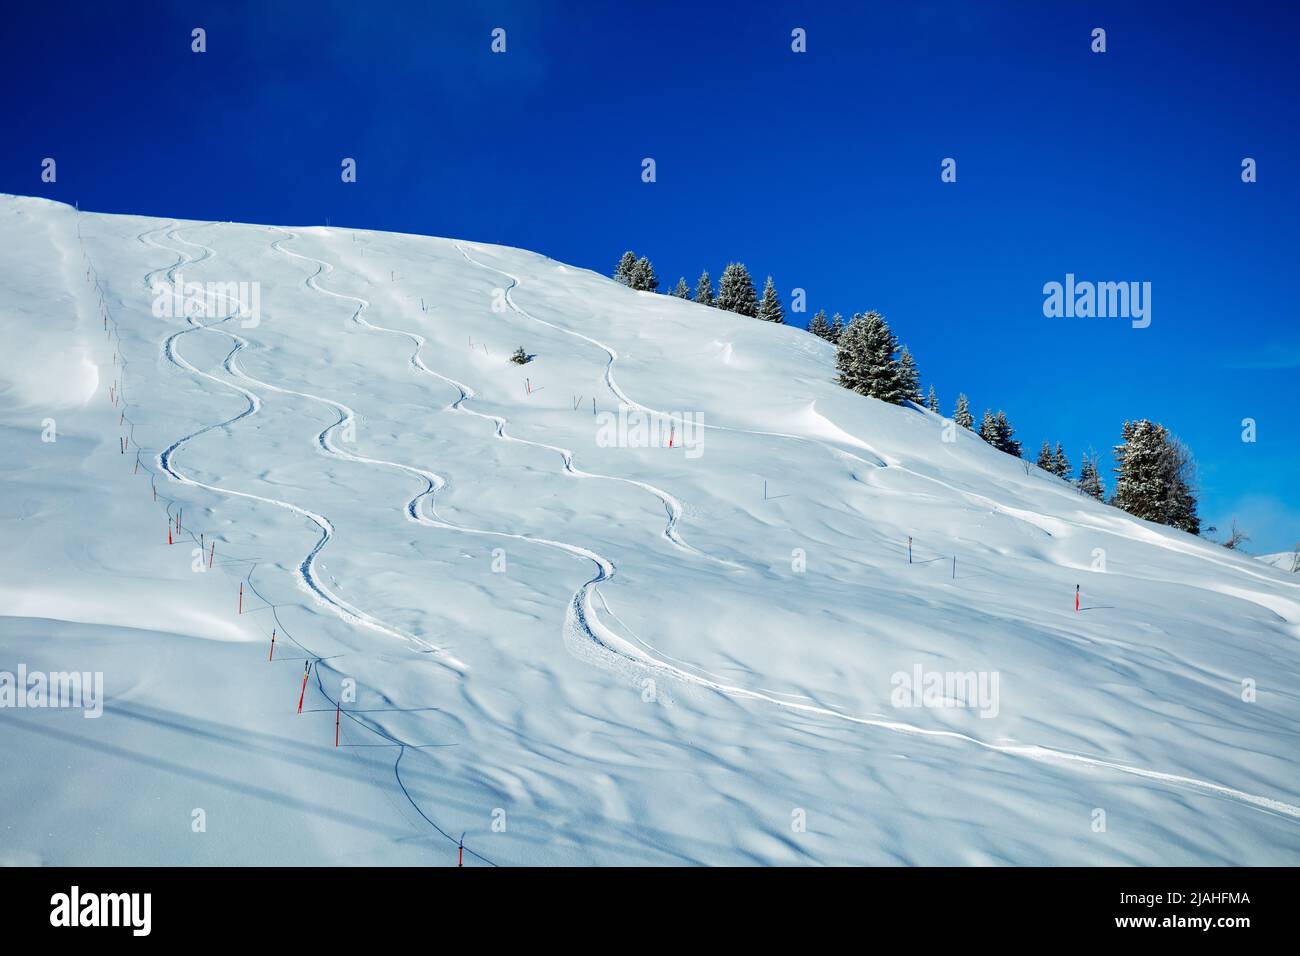 Traces from off-piste snowboarding on a mountain over blue sky Stock Photo